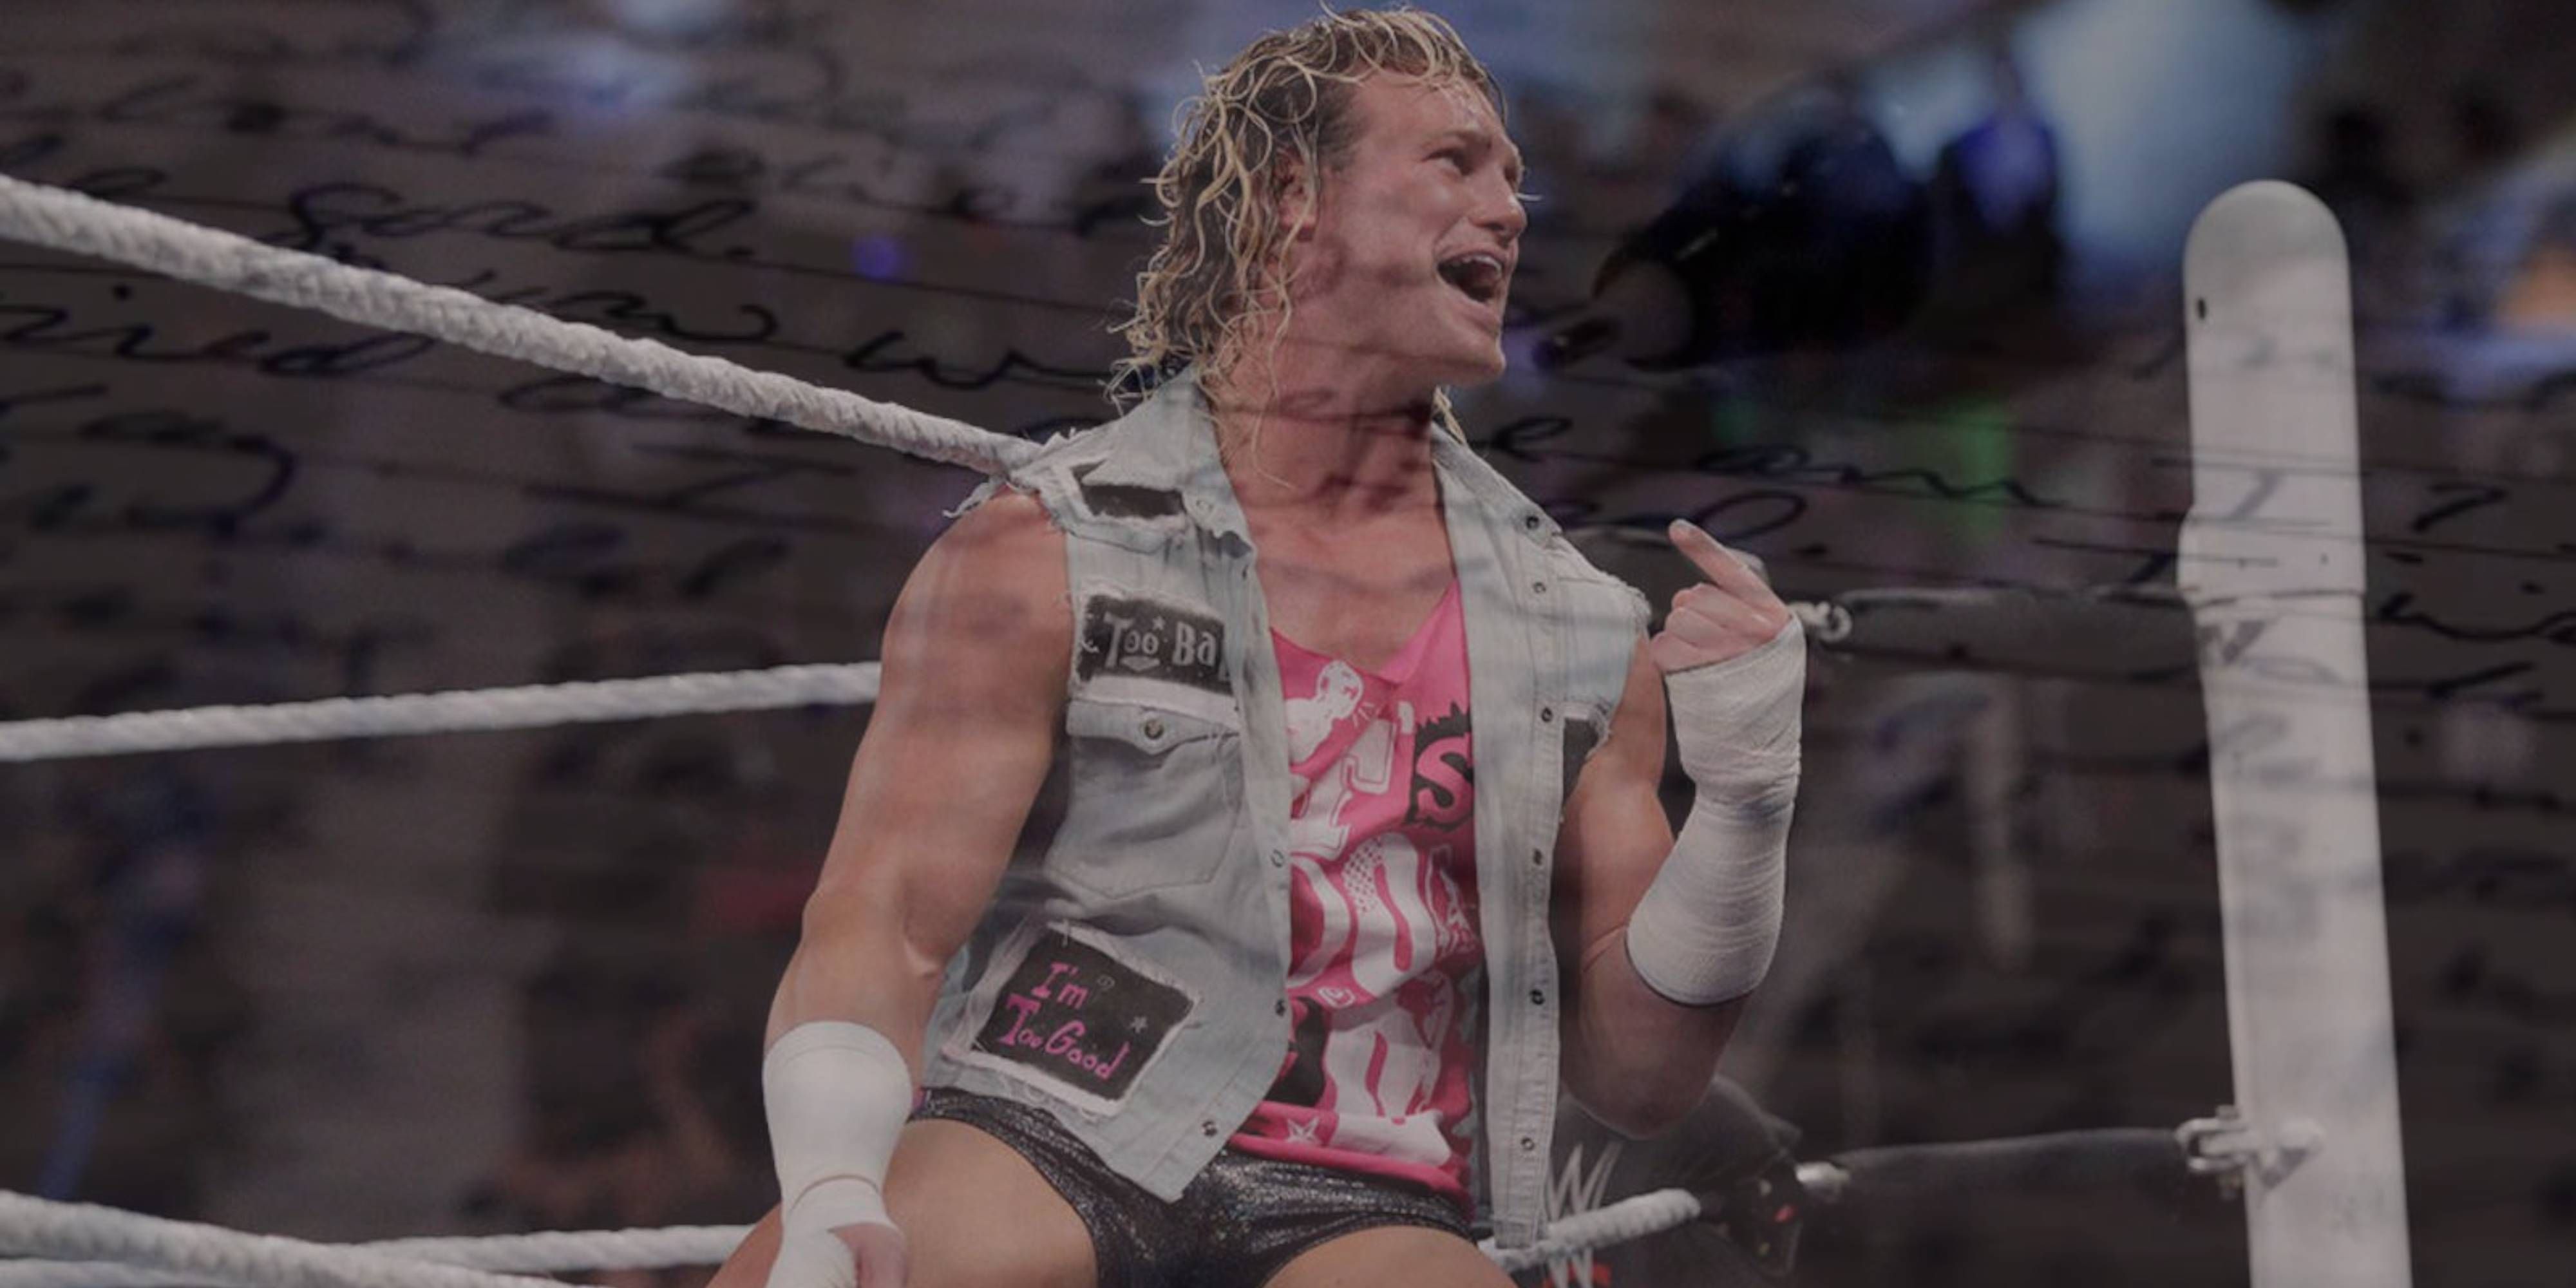 dolph ziggler with a translucent essay and pen overlay